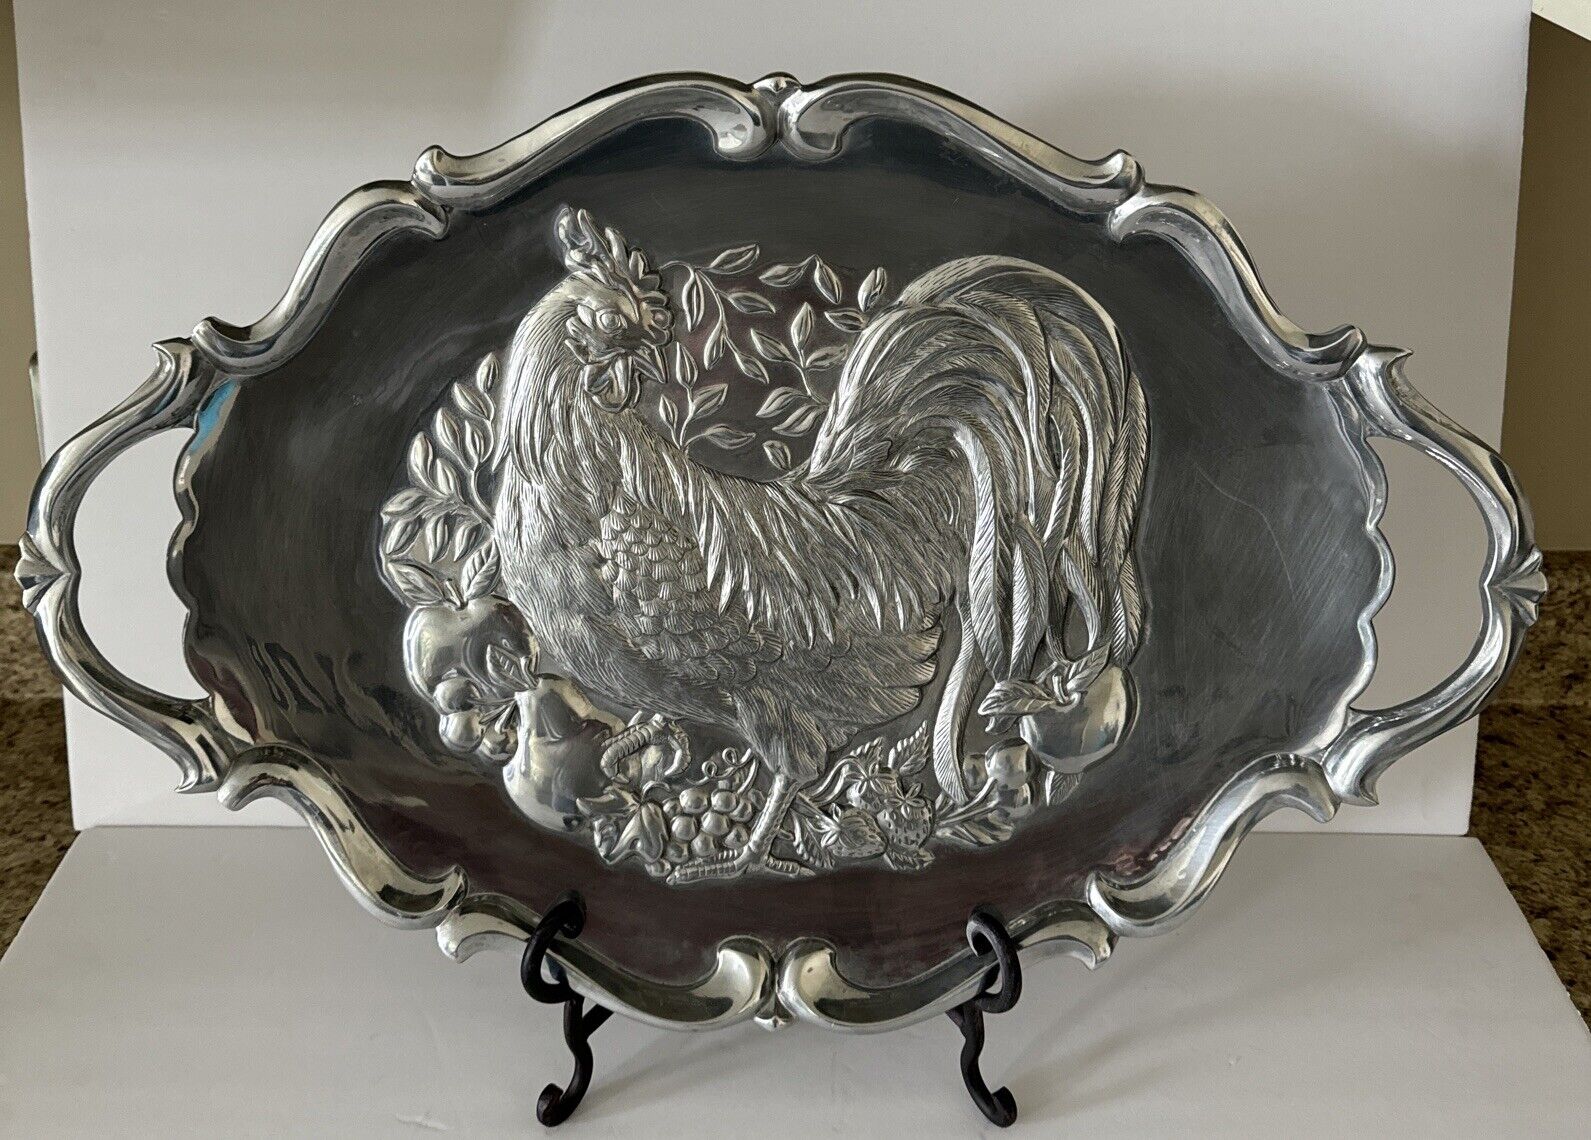 LENOX PEWTER ROOSTER SERVING PLATTER TRAY w HANDLES 23'' LONG RETIRED BEAUTIFUL